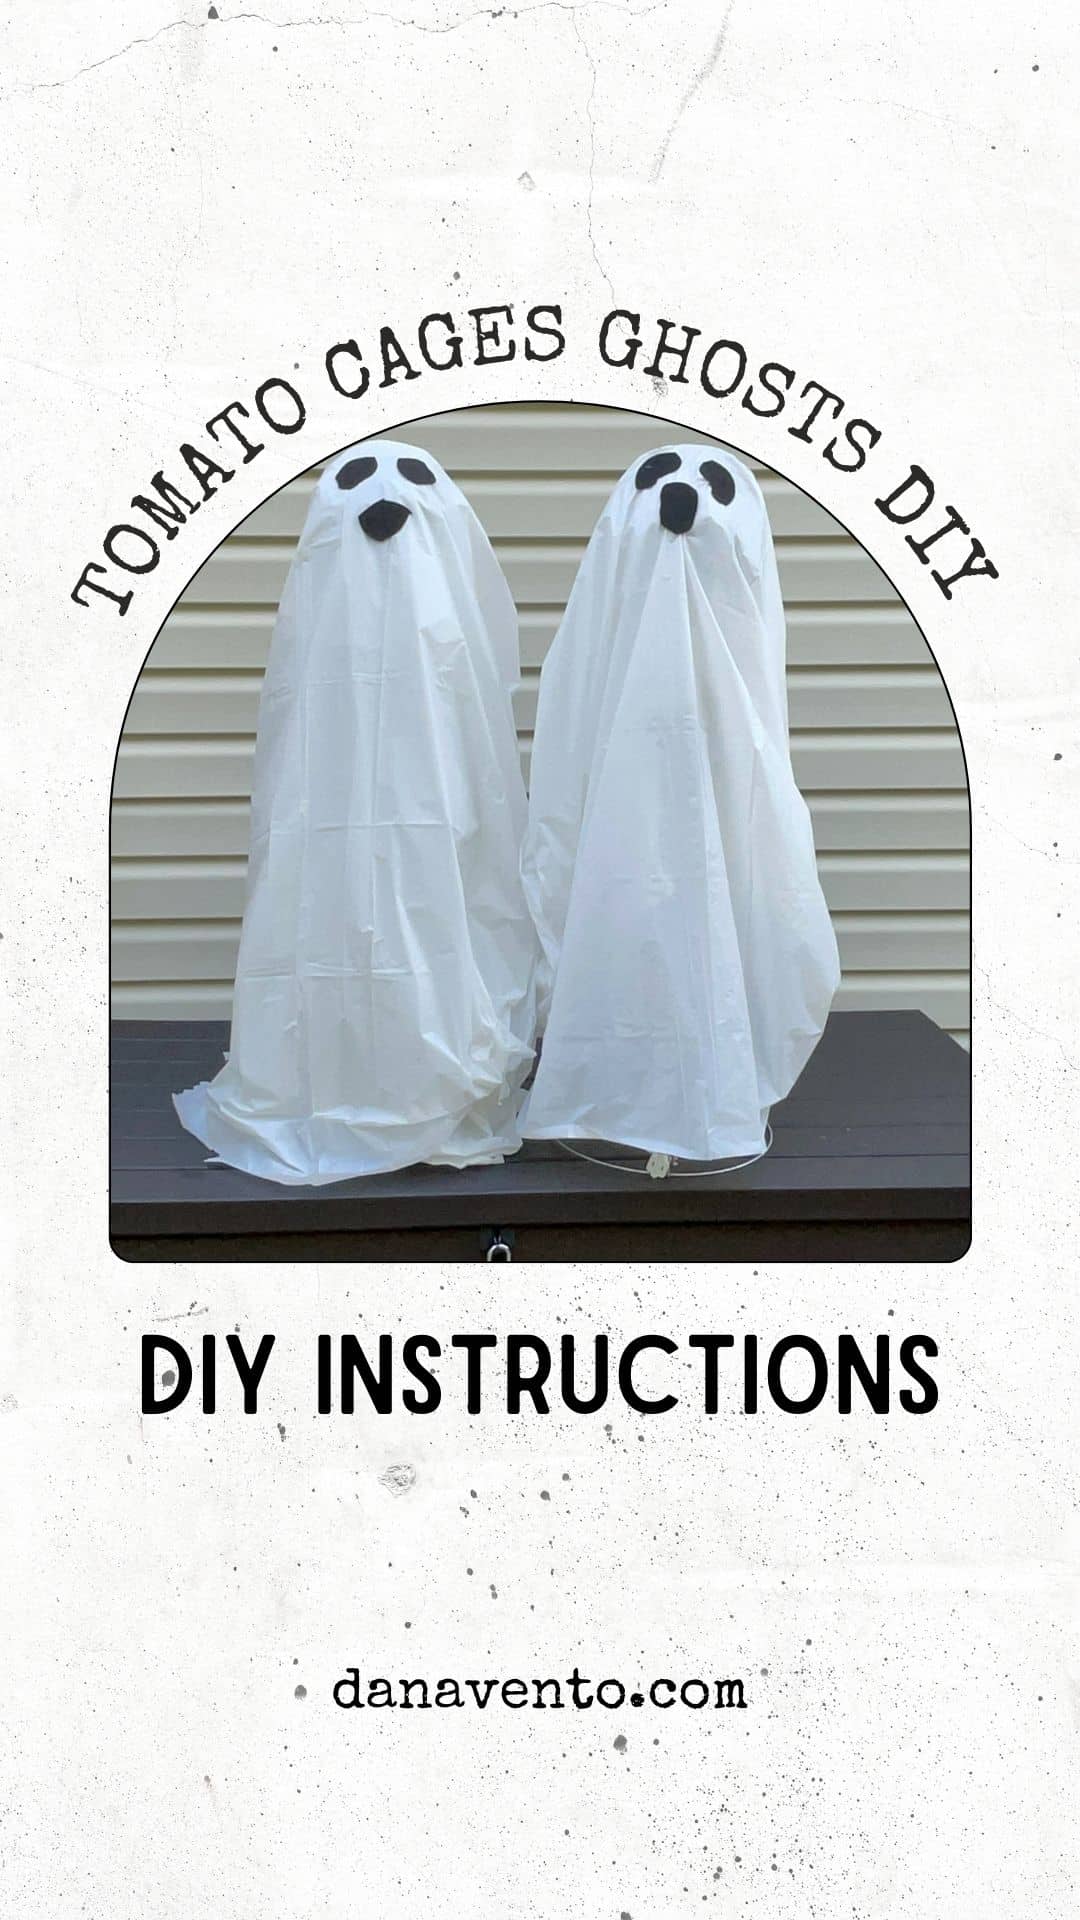 DIY outdoor ghosts made using my tomato cage ghost instructions